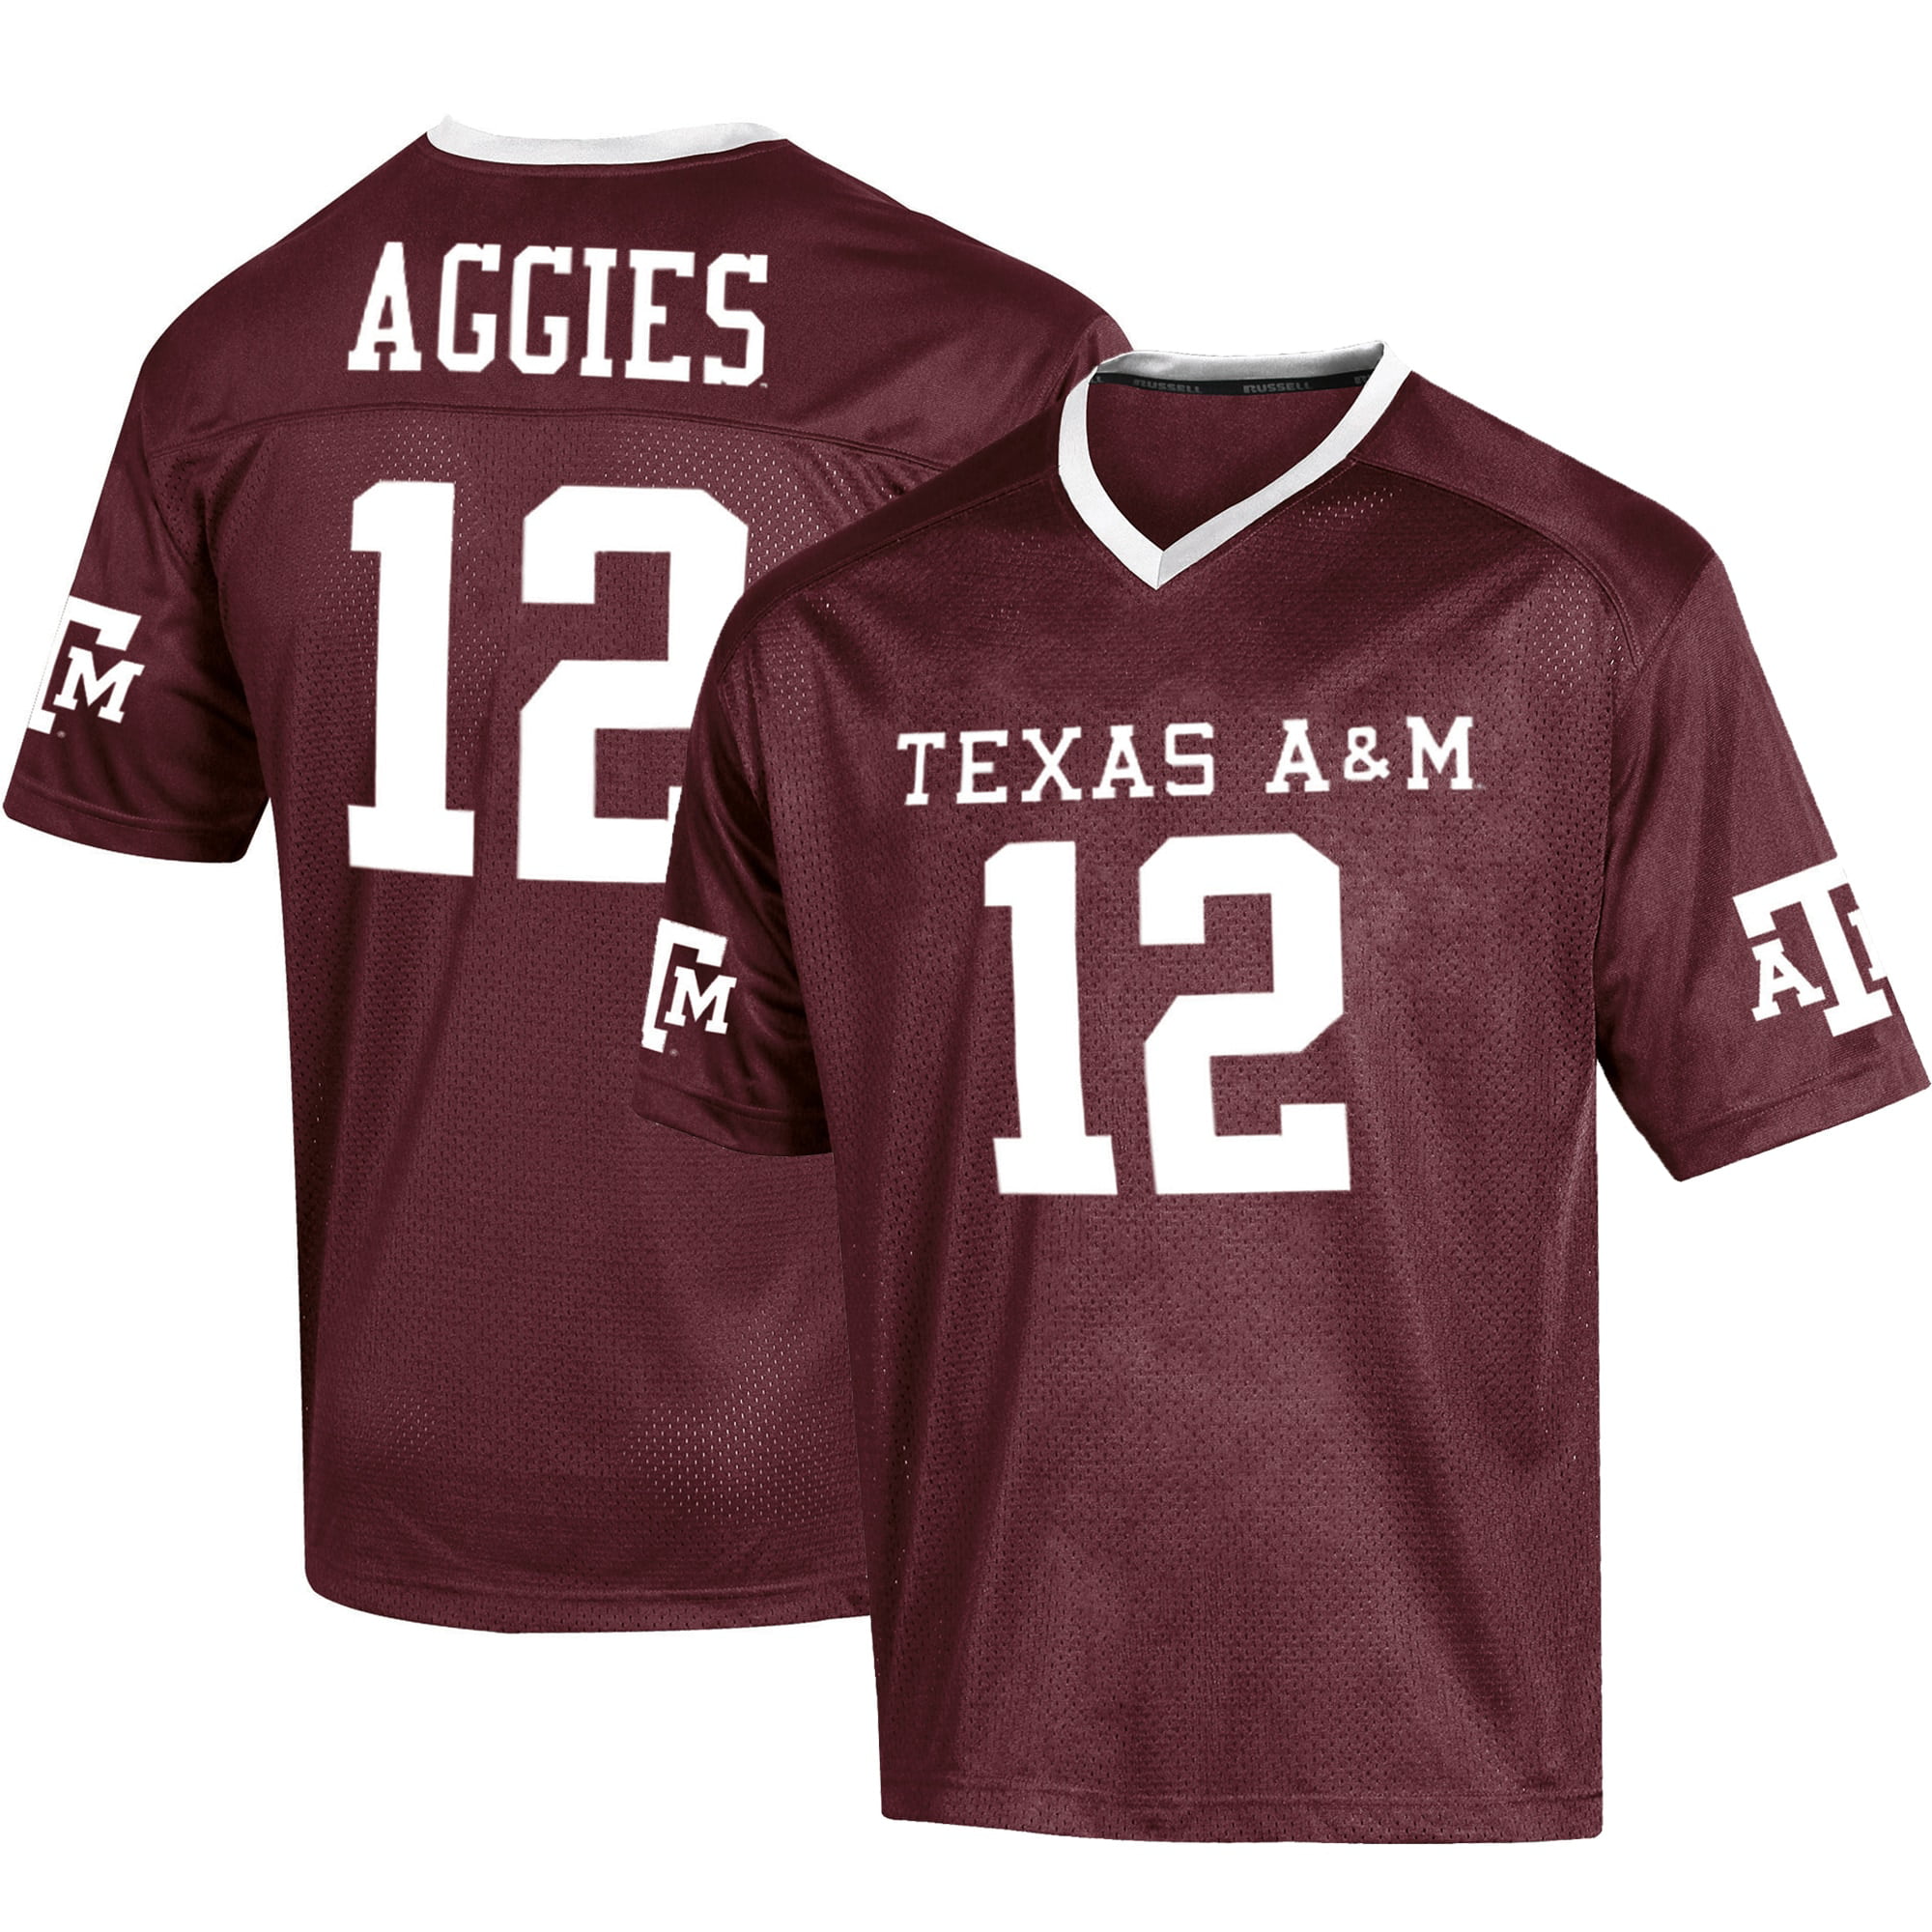 youth texas a&m football jersey